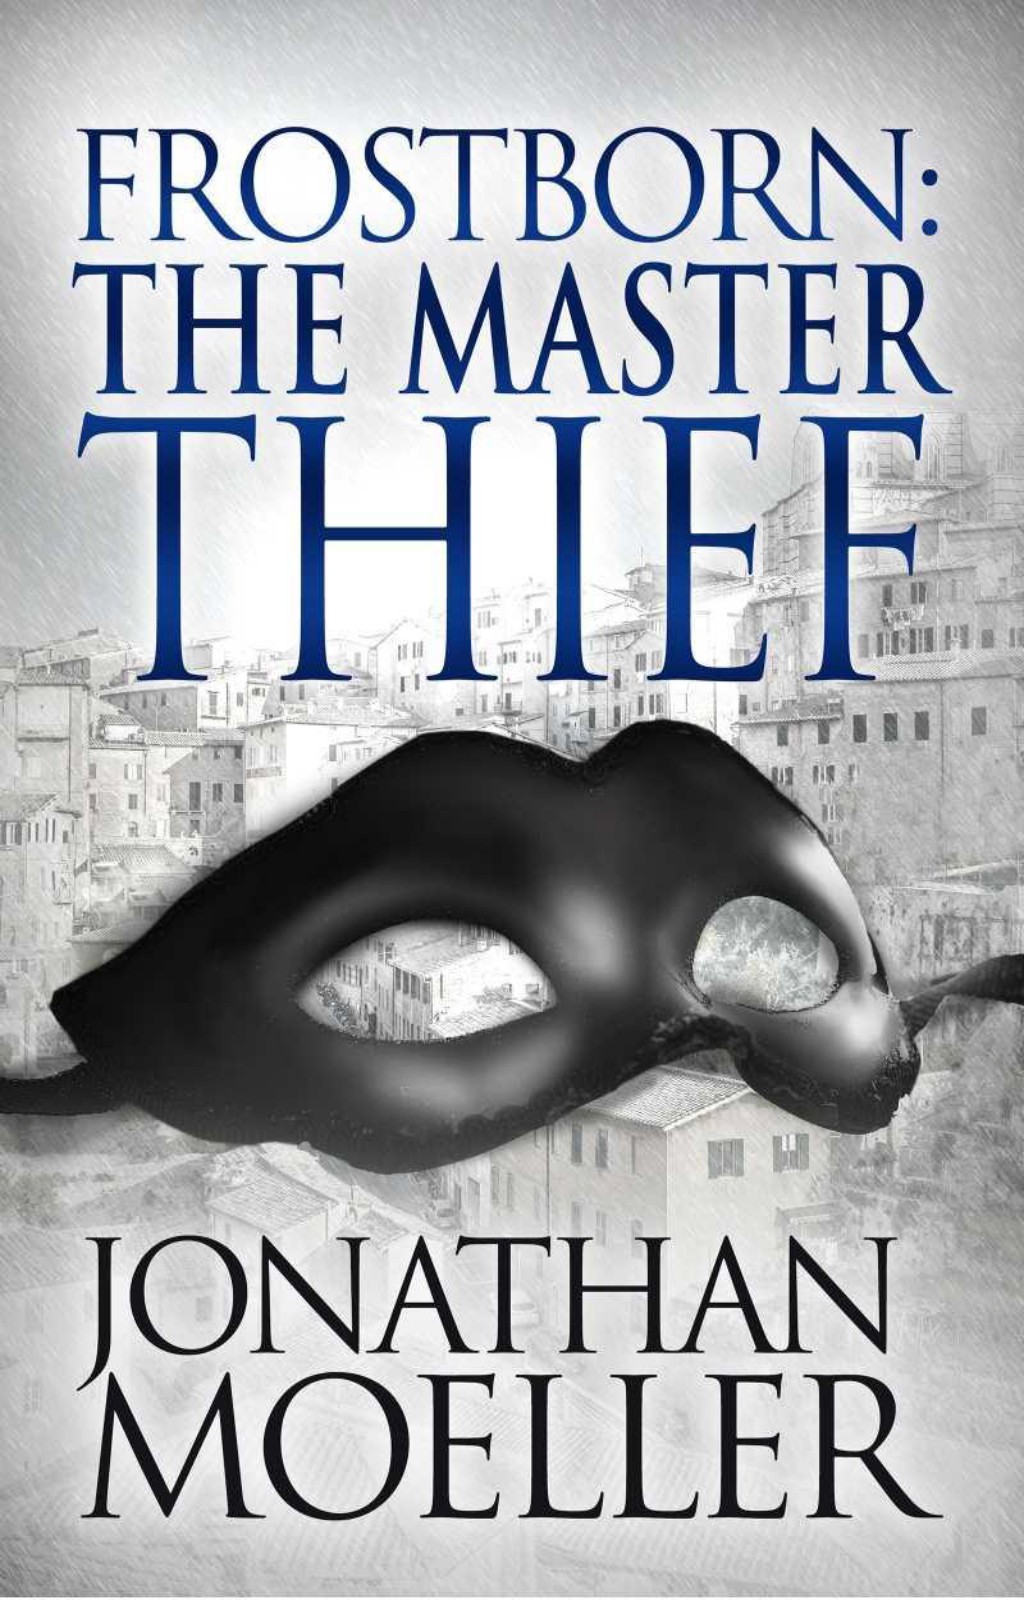 Frostborn: The Master Thief by Jonathan Moeller